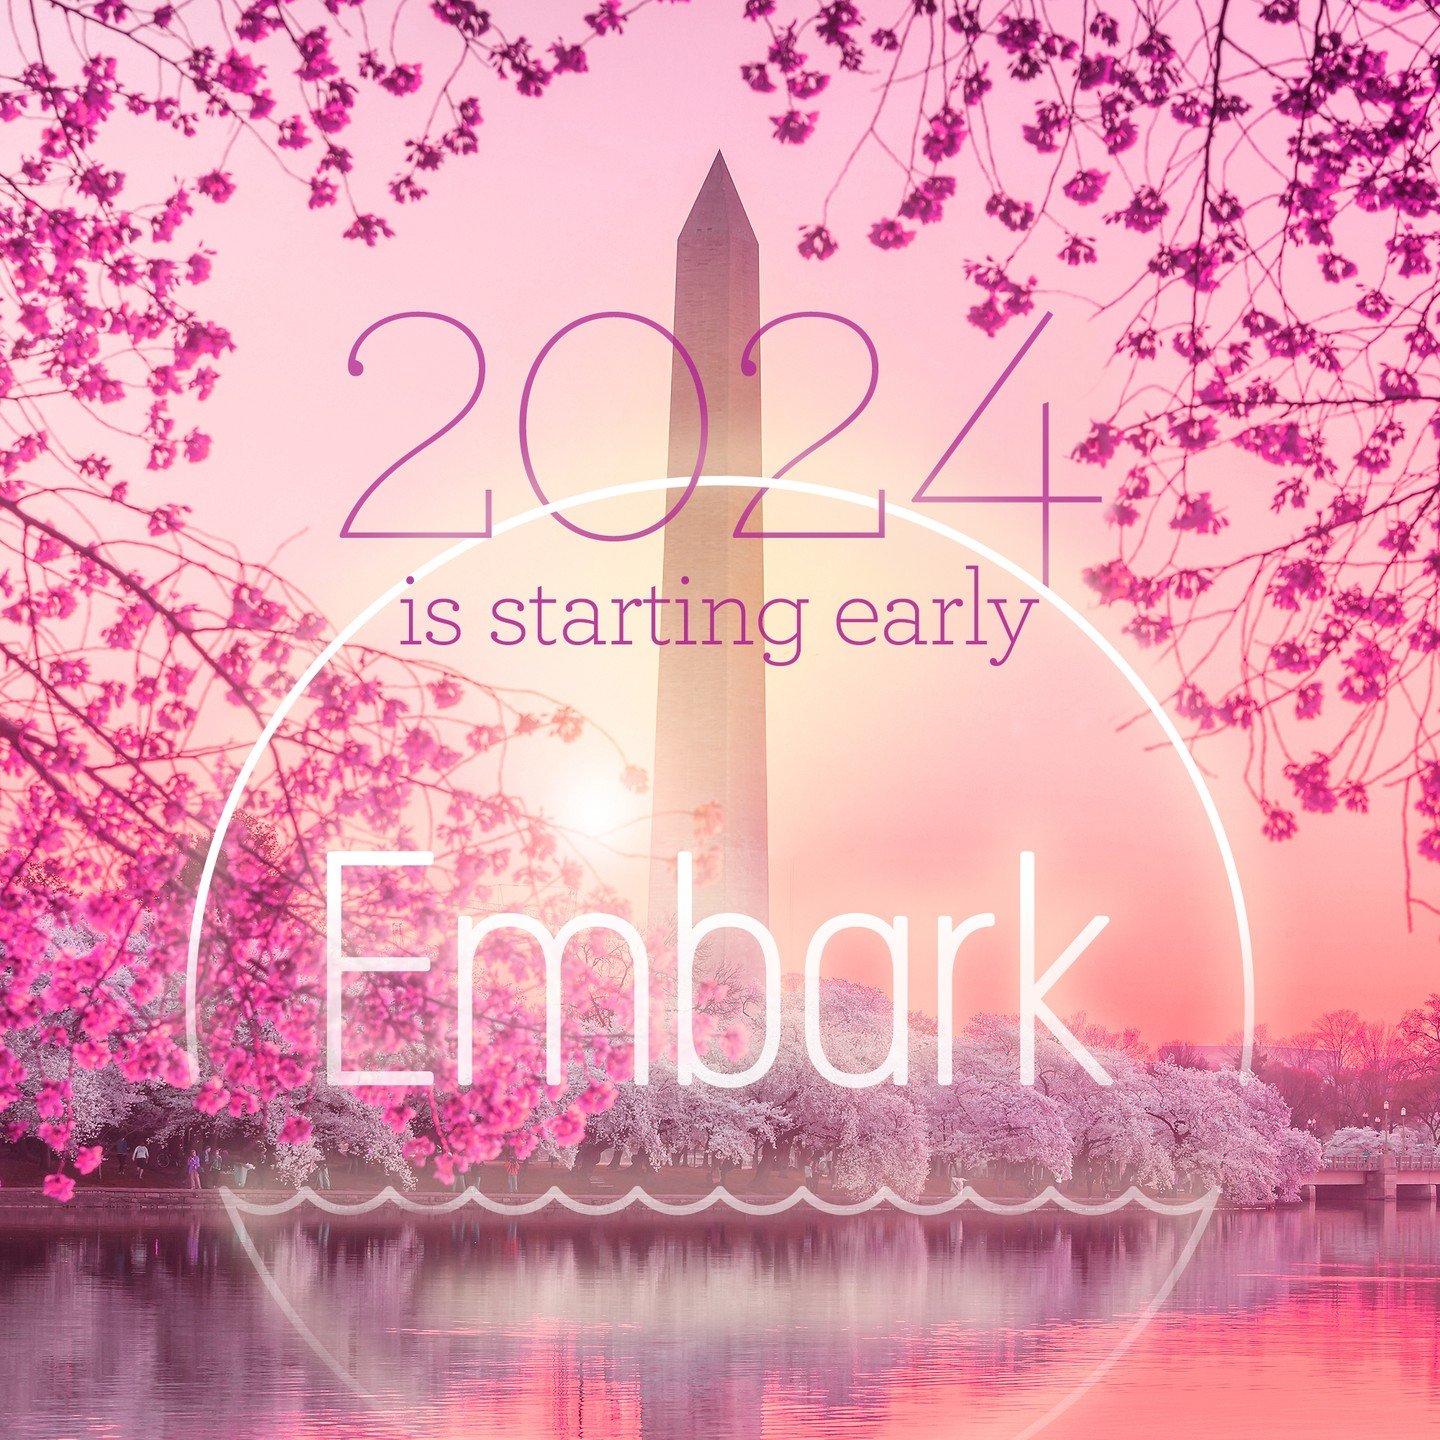 With warm temperatures forecast for the coming weeks, we are starting our 2024 season ahead of schedule! Book online or give us a call! http://www.embarkdc.com